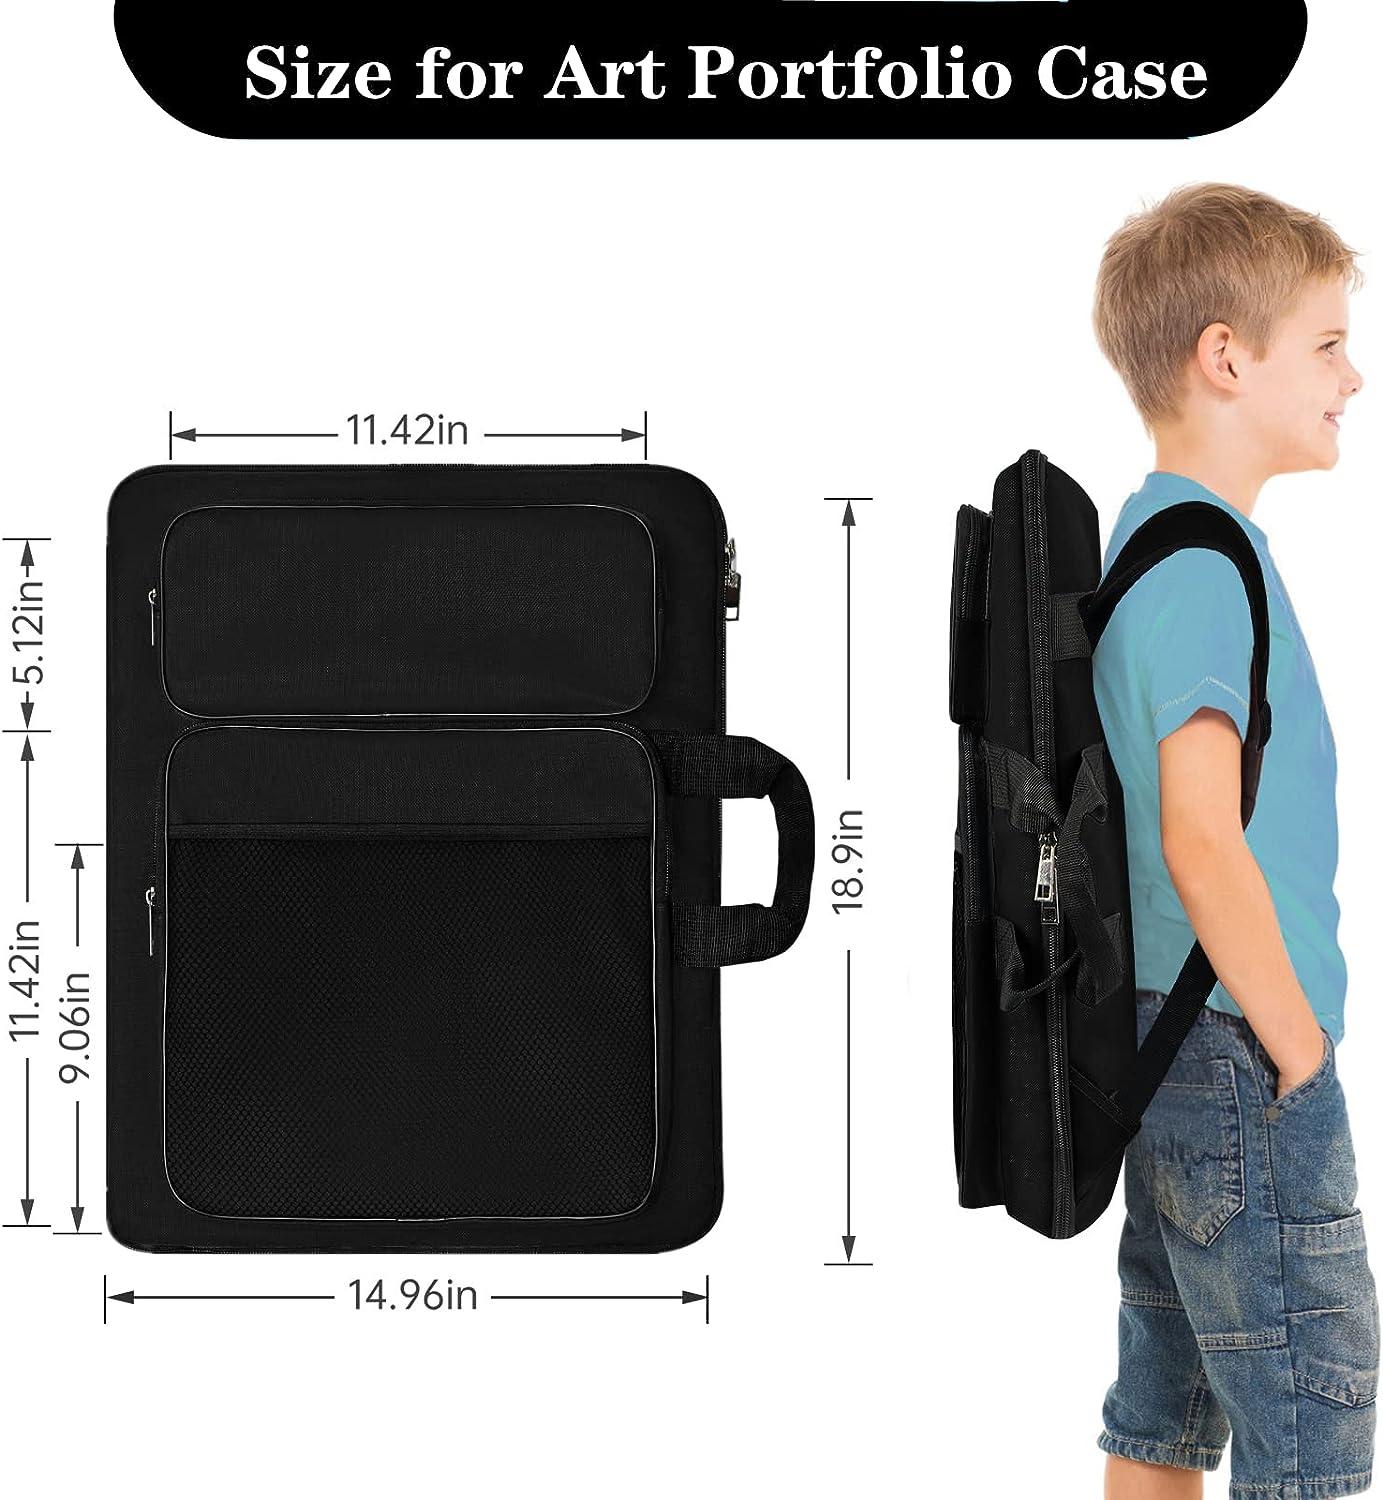 Art Portfolio Case,Art Portfolio Bags Carry Case Art Supplies Tote,  Backpack Bag with Pockets Handle Organizer,Student Carrying Storage Bag  Artwork Poster Board,Project Drawing Blue 